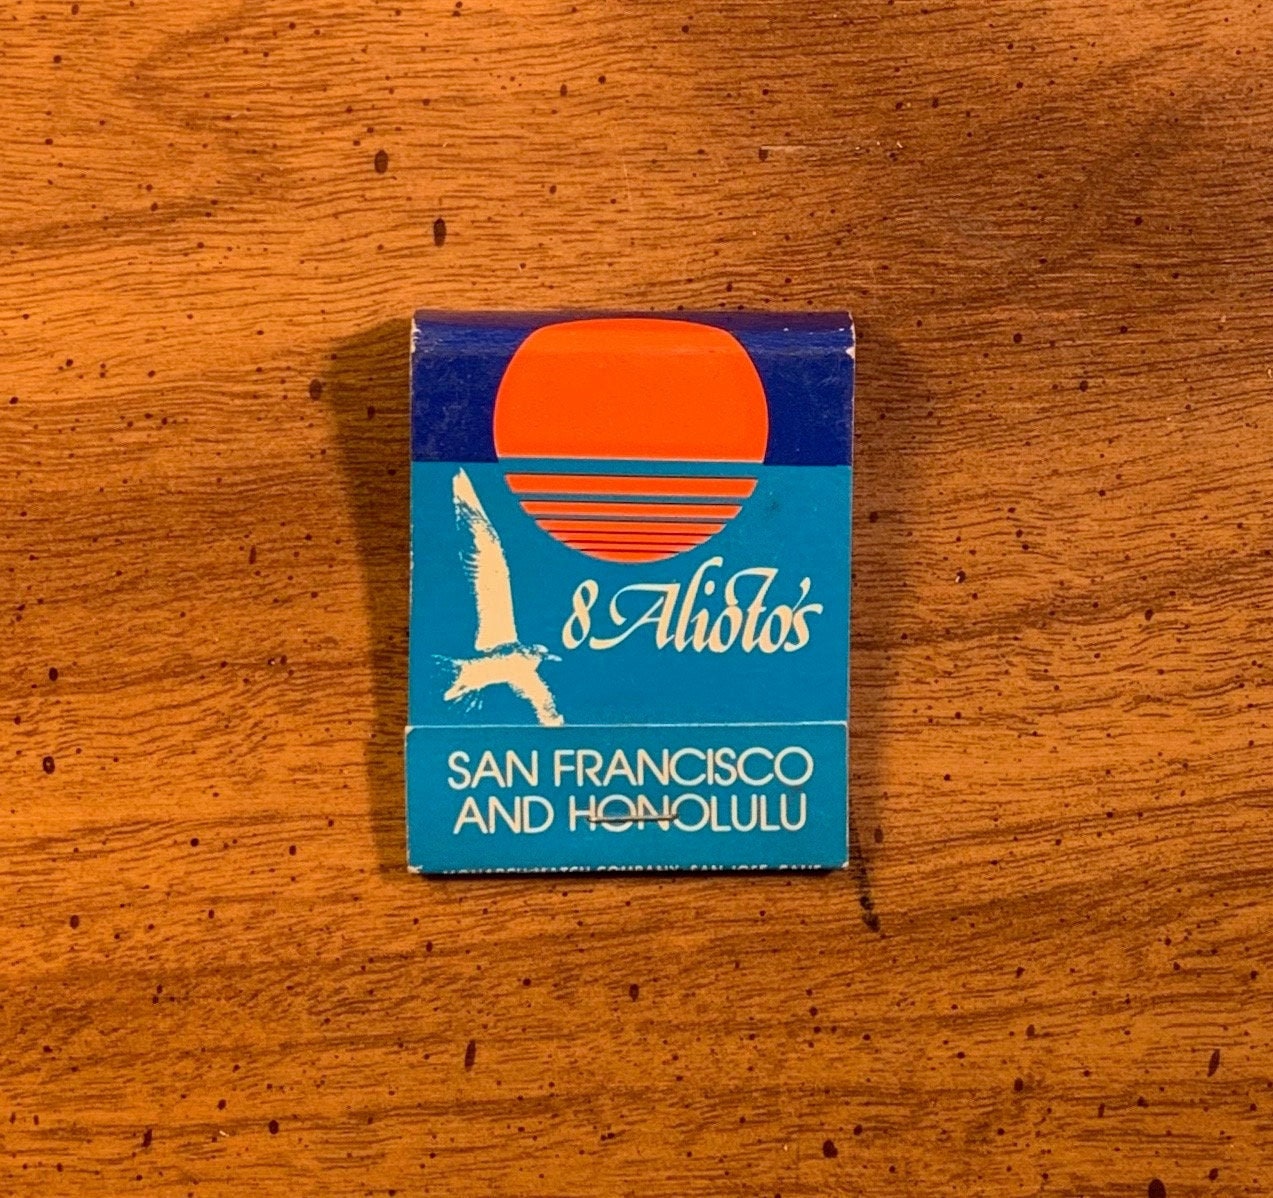 Vintage Matchbook, Aliotos, Seafood Restaurant, Honolulu, Hawaii, San Francisco, California, with 20 Matches, Free Ship in Usa